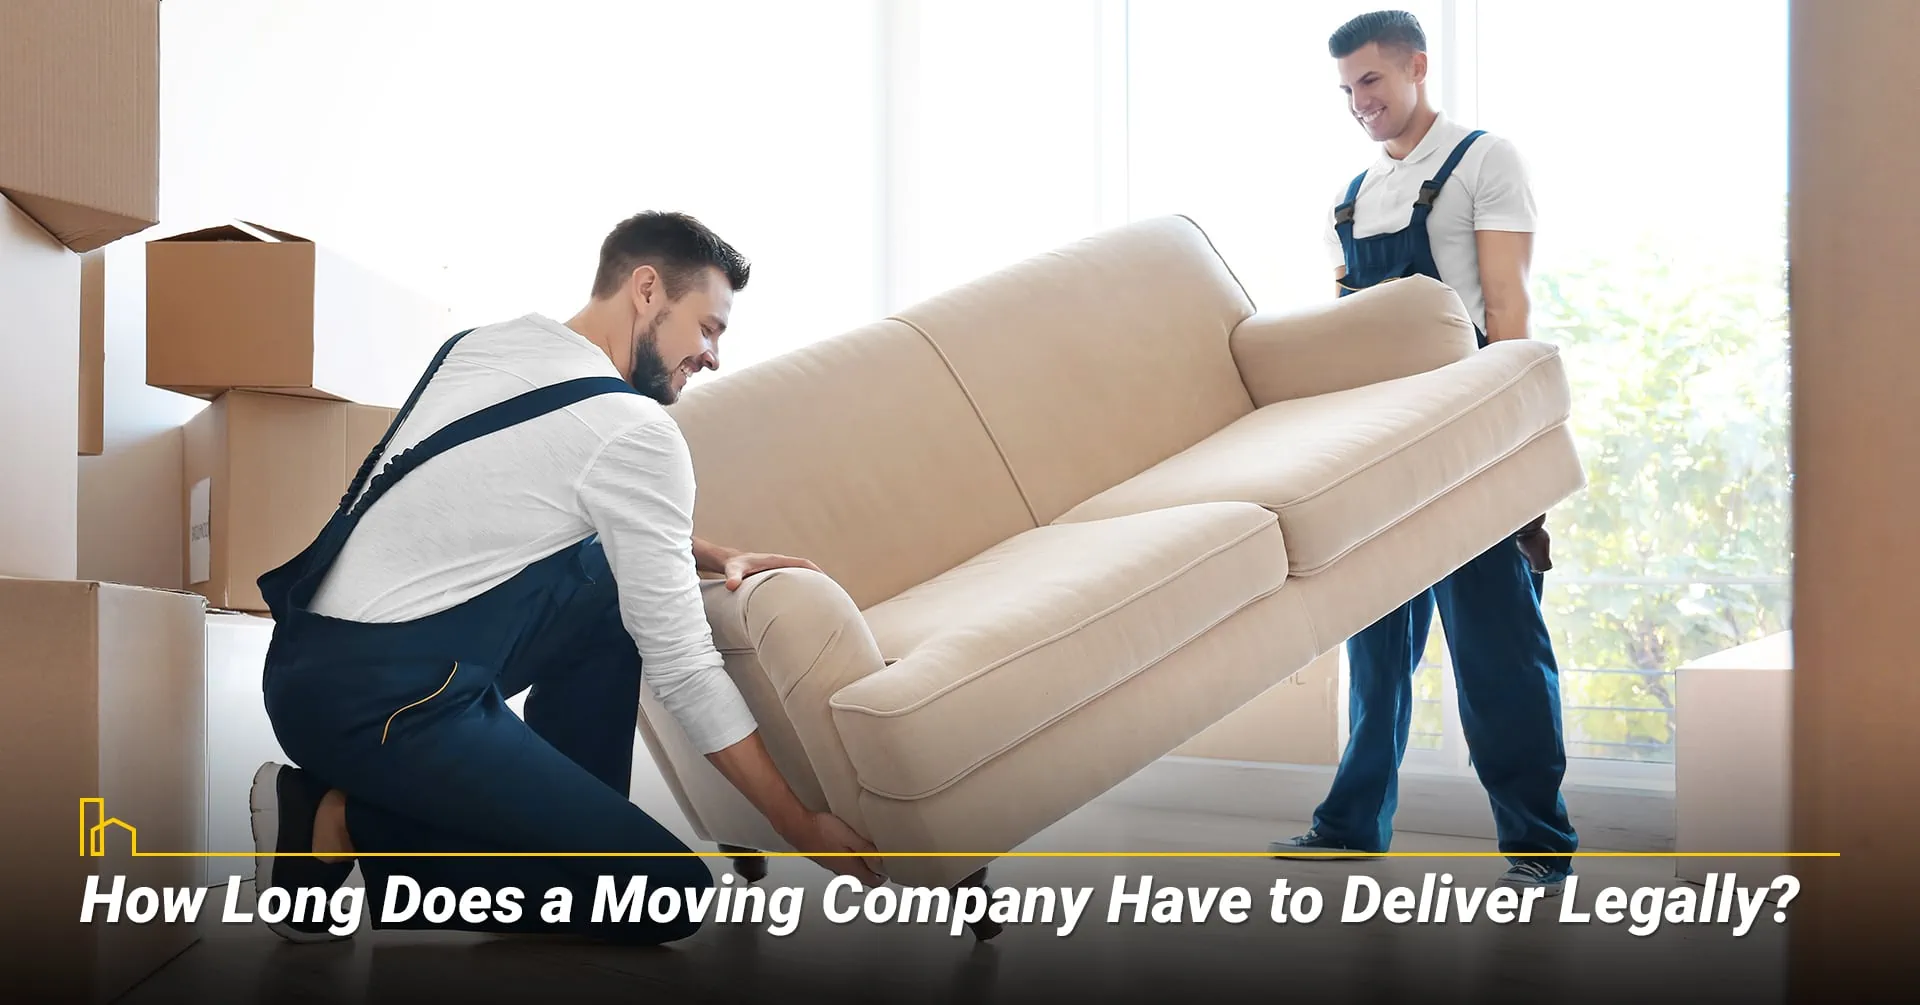 How Long Does a Moving Company Have to Deliver Legally?